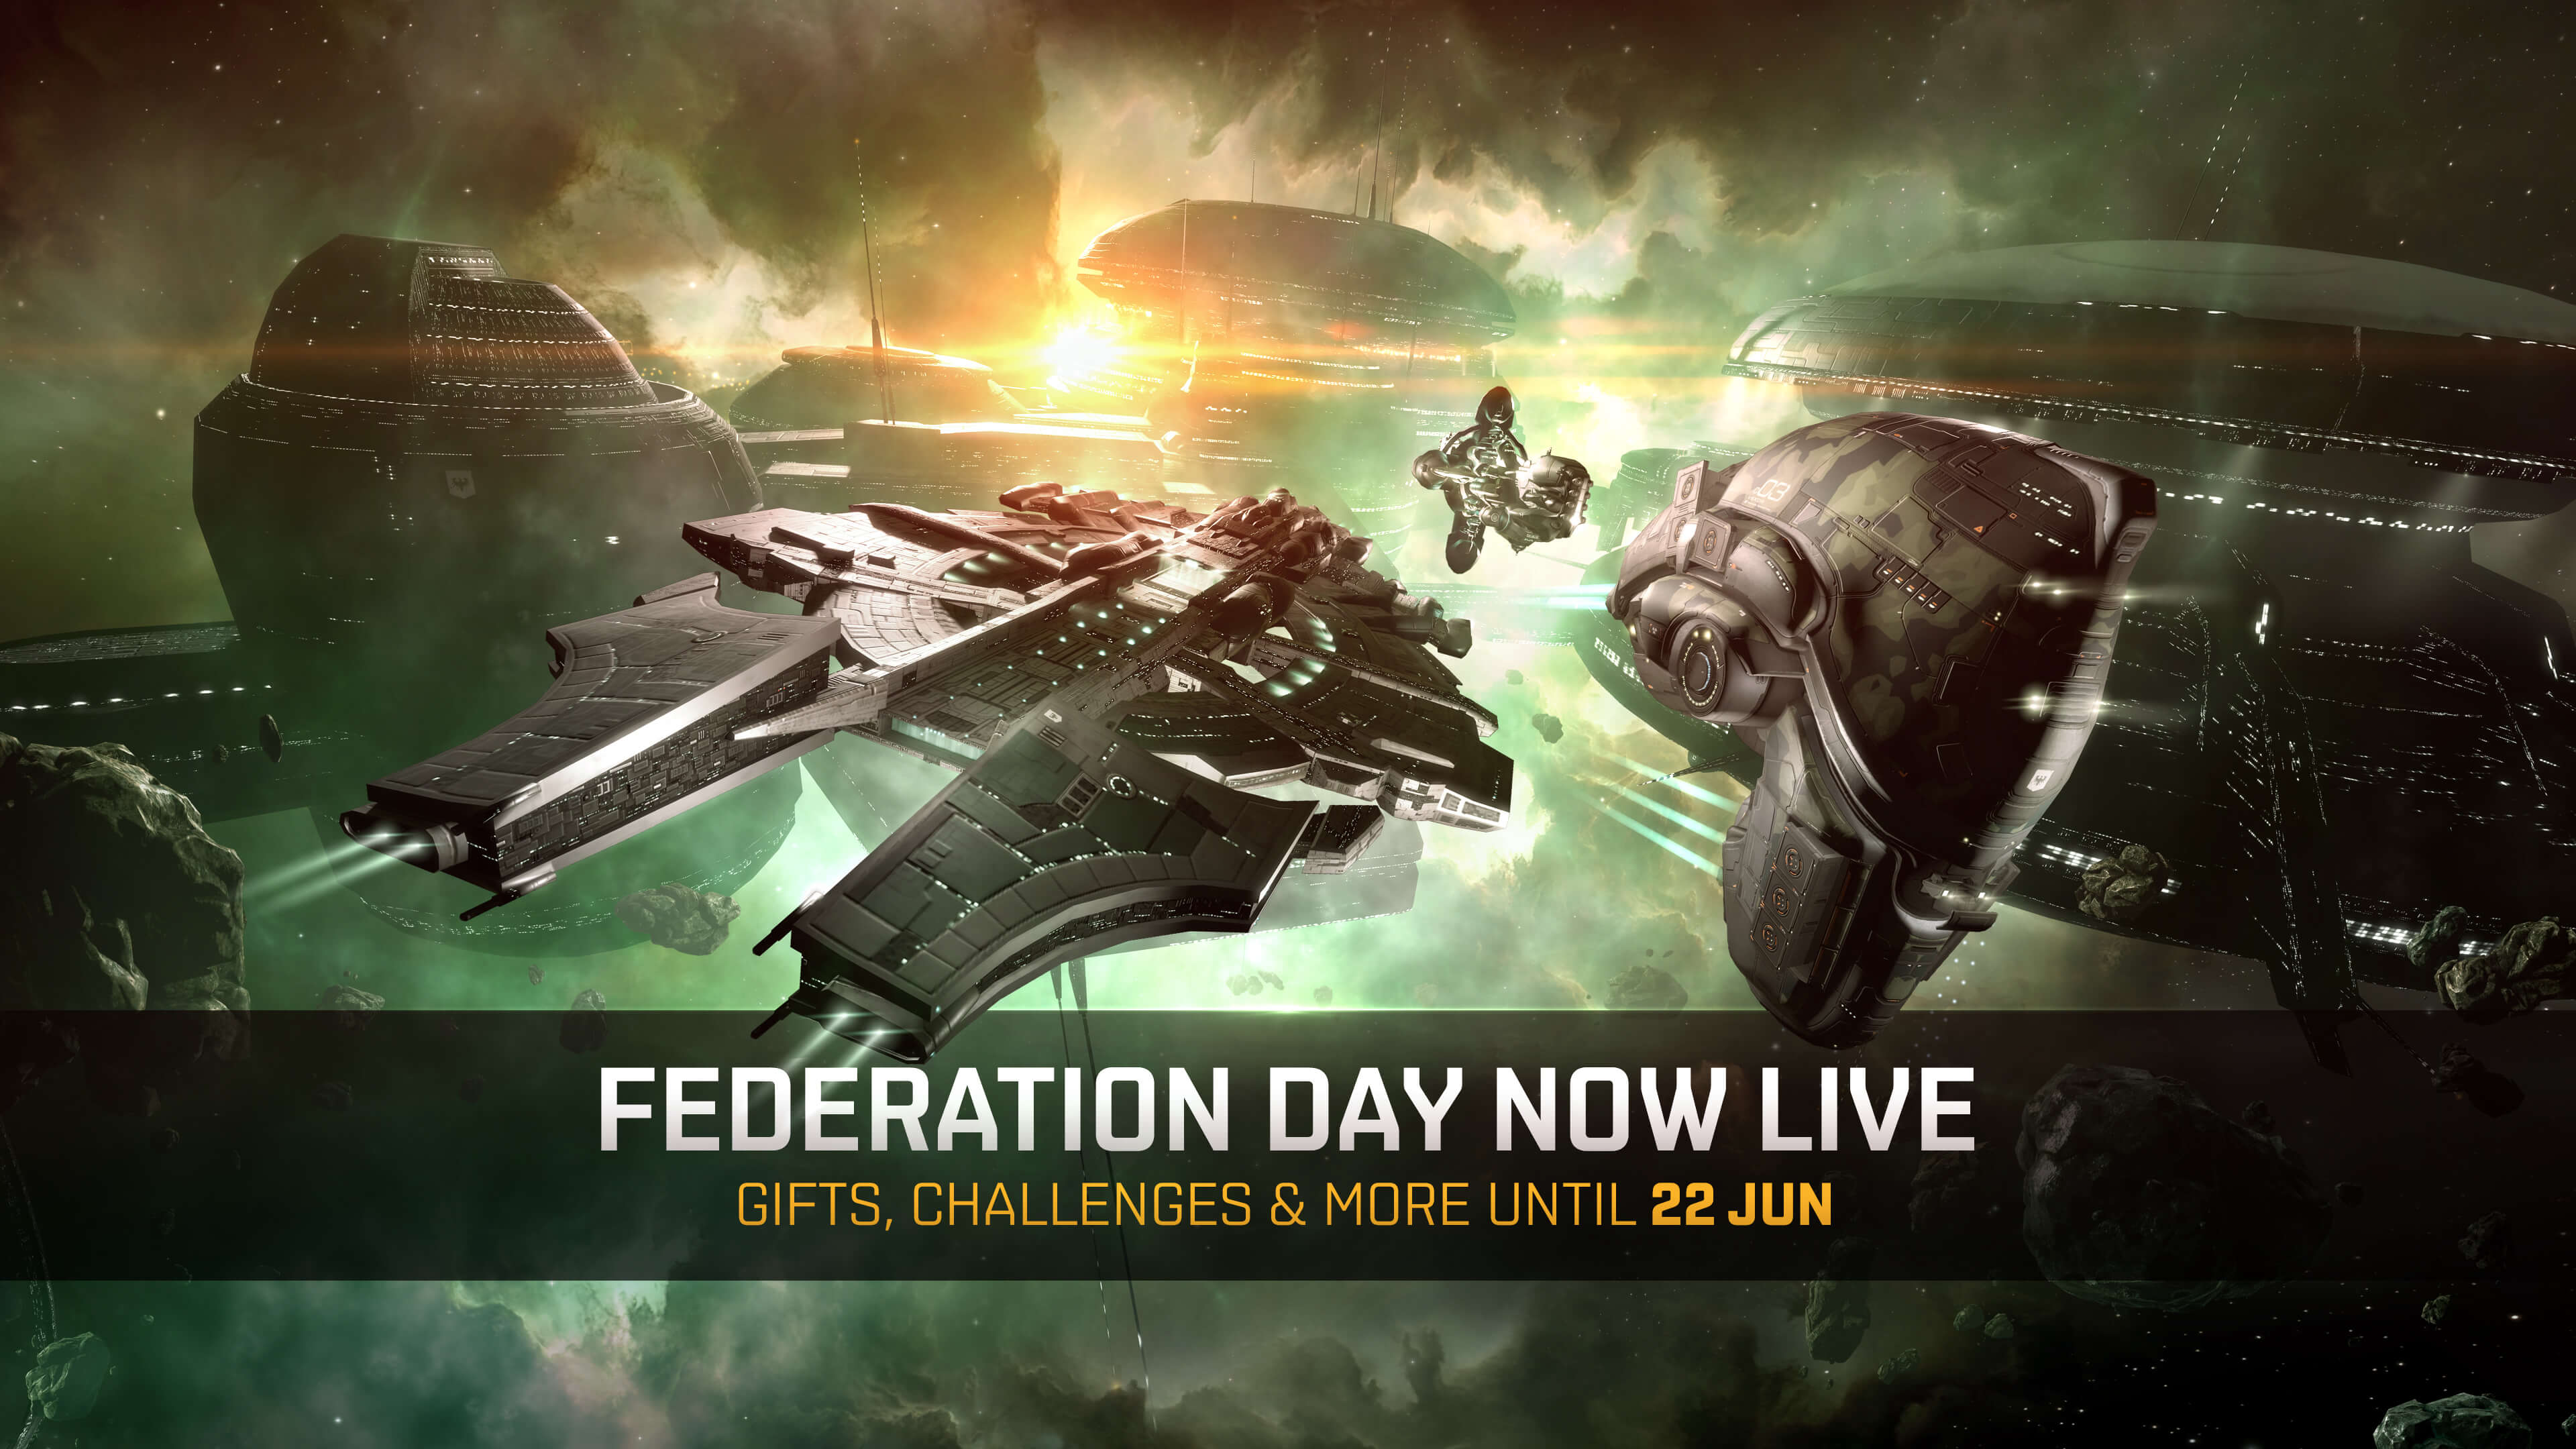 Federation Day event is live - EVE Updates